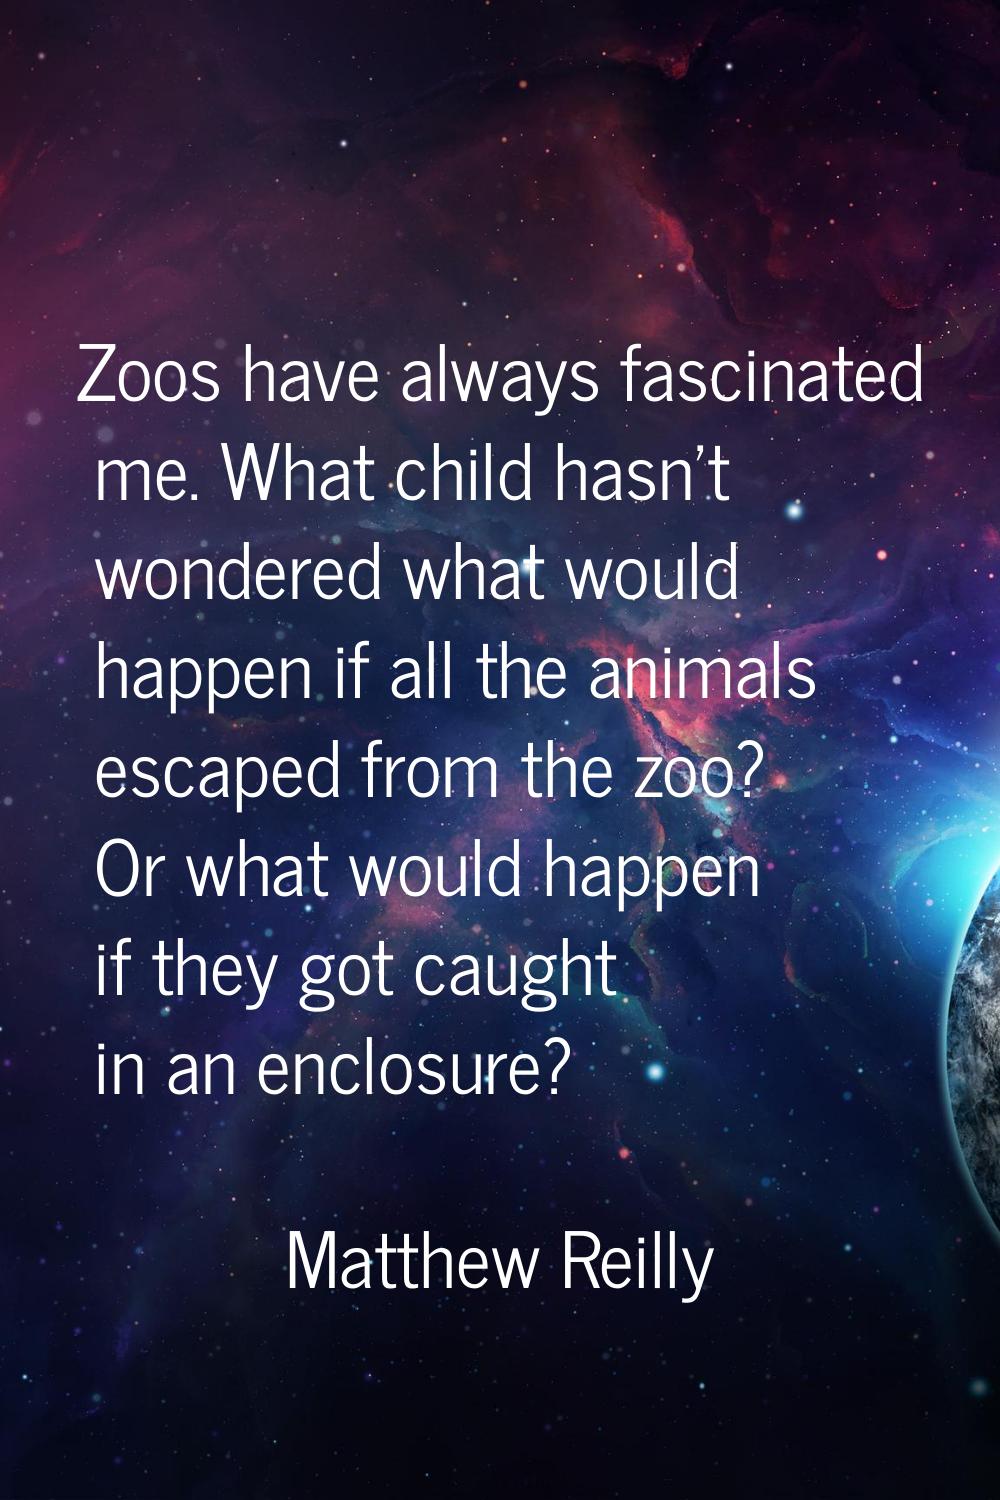 Zoos have always fascinated me. What child hasn't wondered what would happen if all the animals esc